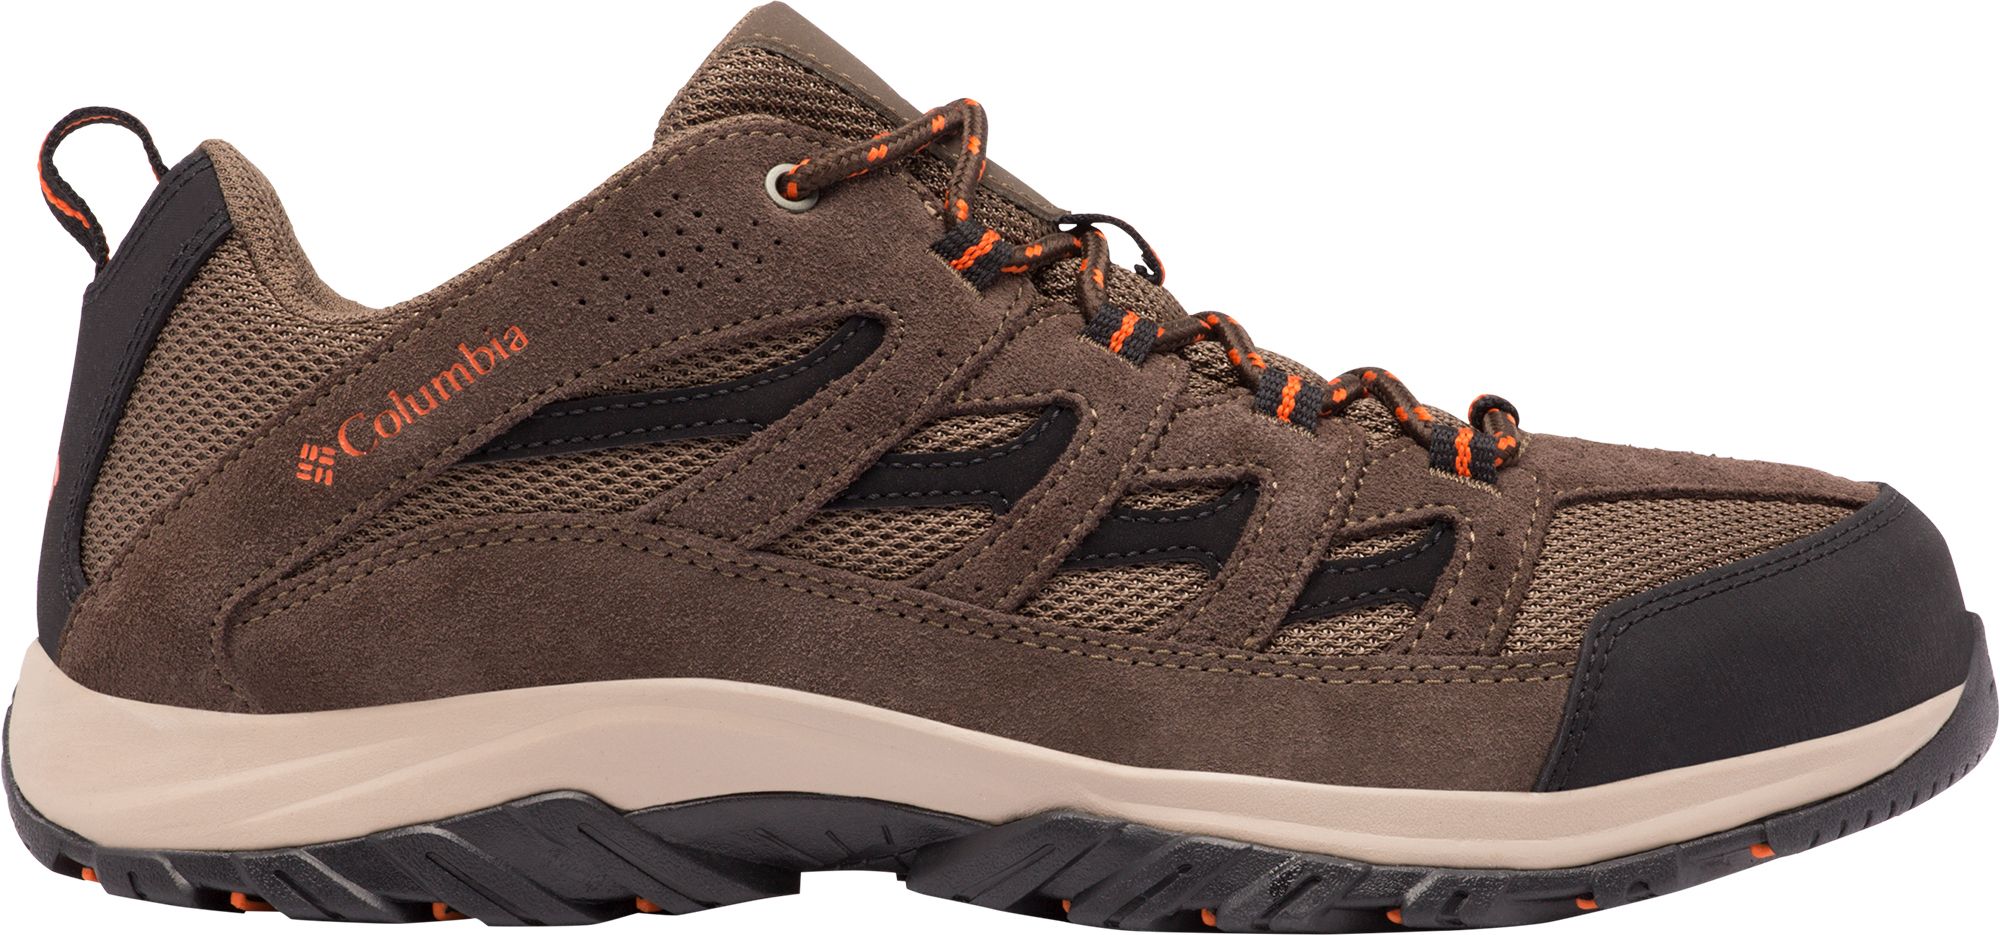 Photos - Trekking Shoes Columbia Men's Crestwood Hiking Shoes, Size 11, Camo Brown | Father's Day 